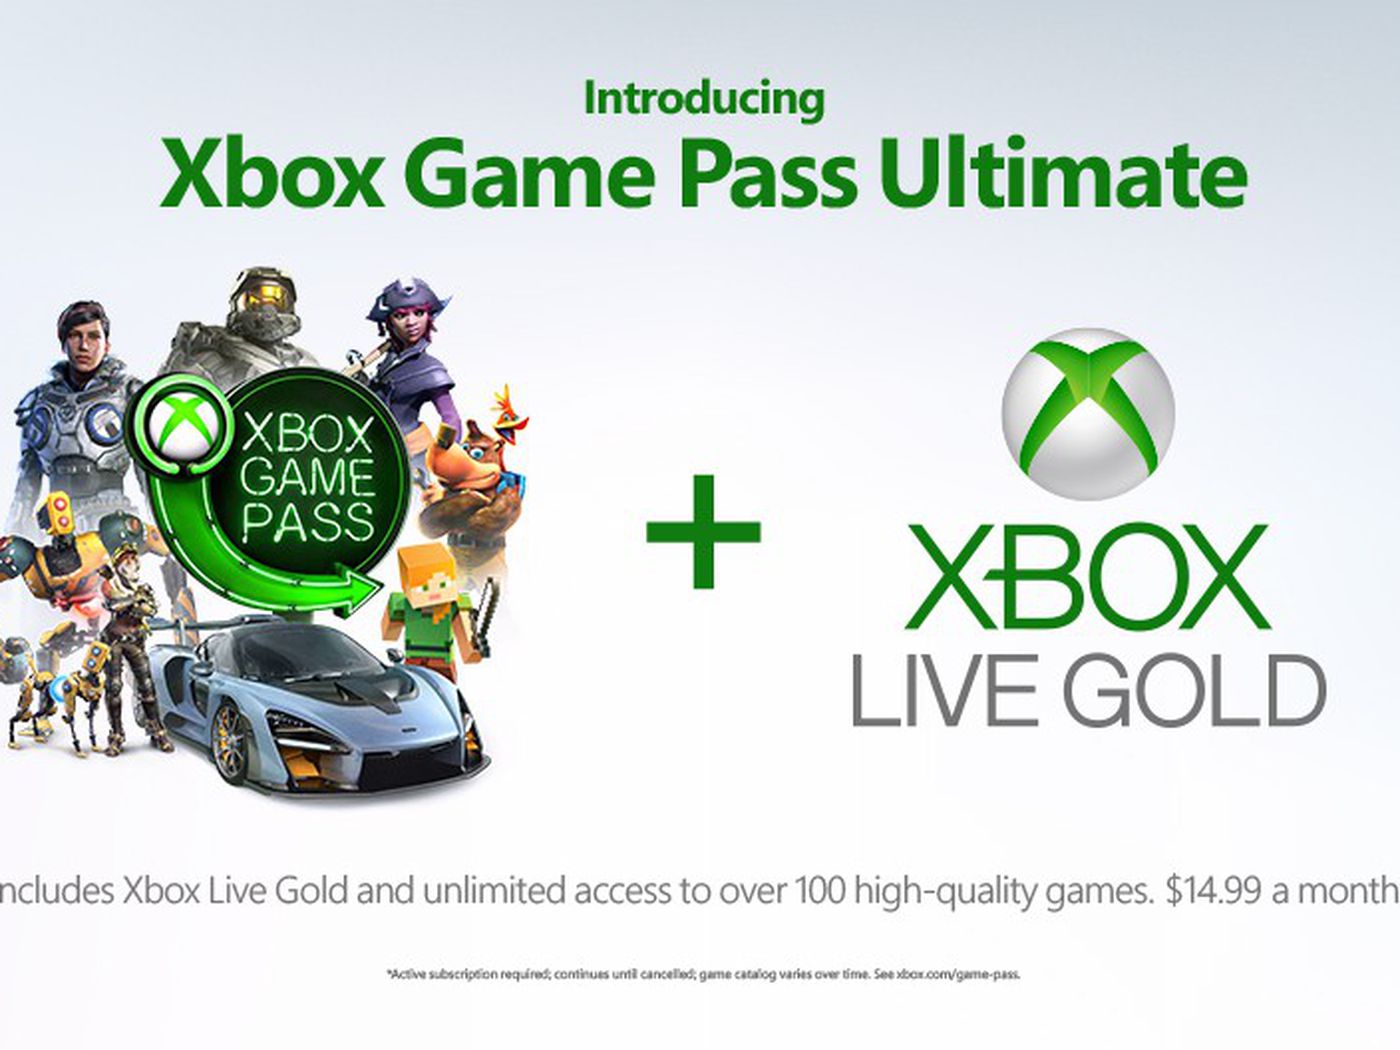 Prik Hymne Aandringen Microsoft Xbox Game Pass Ultimate: PC and Xbox games for $14.99 per month -  The Verge